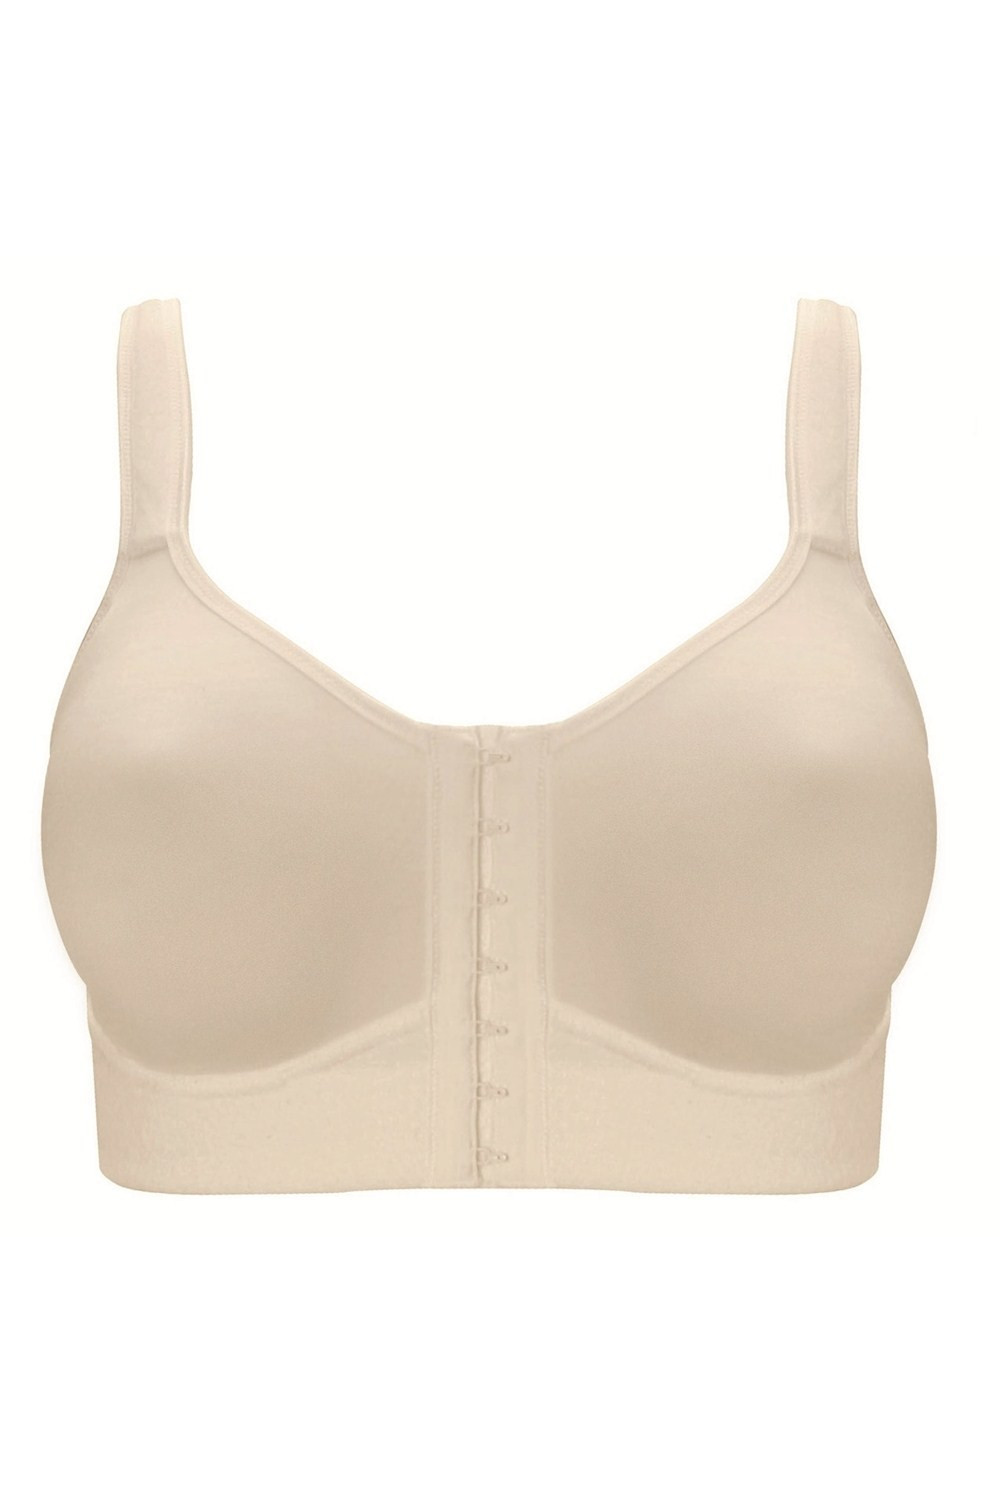 Salvia Post mastectomy bra available - Bliss Lingerie Care